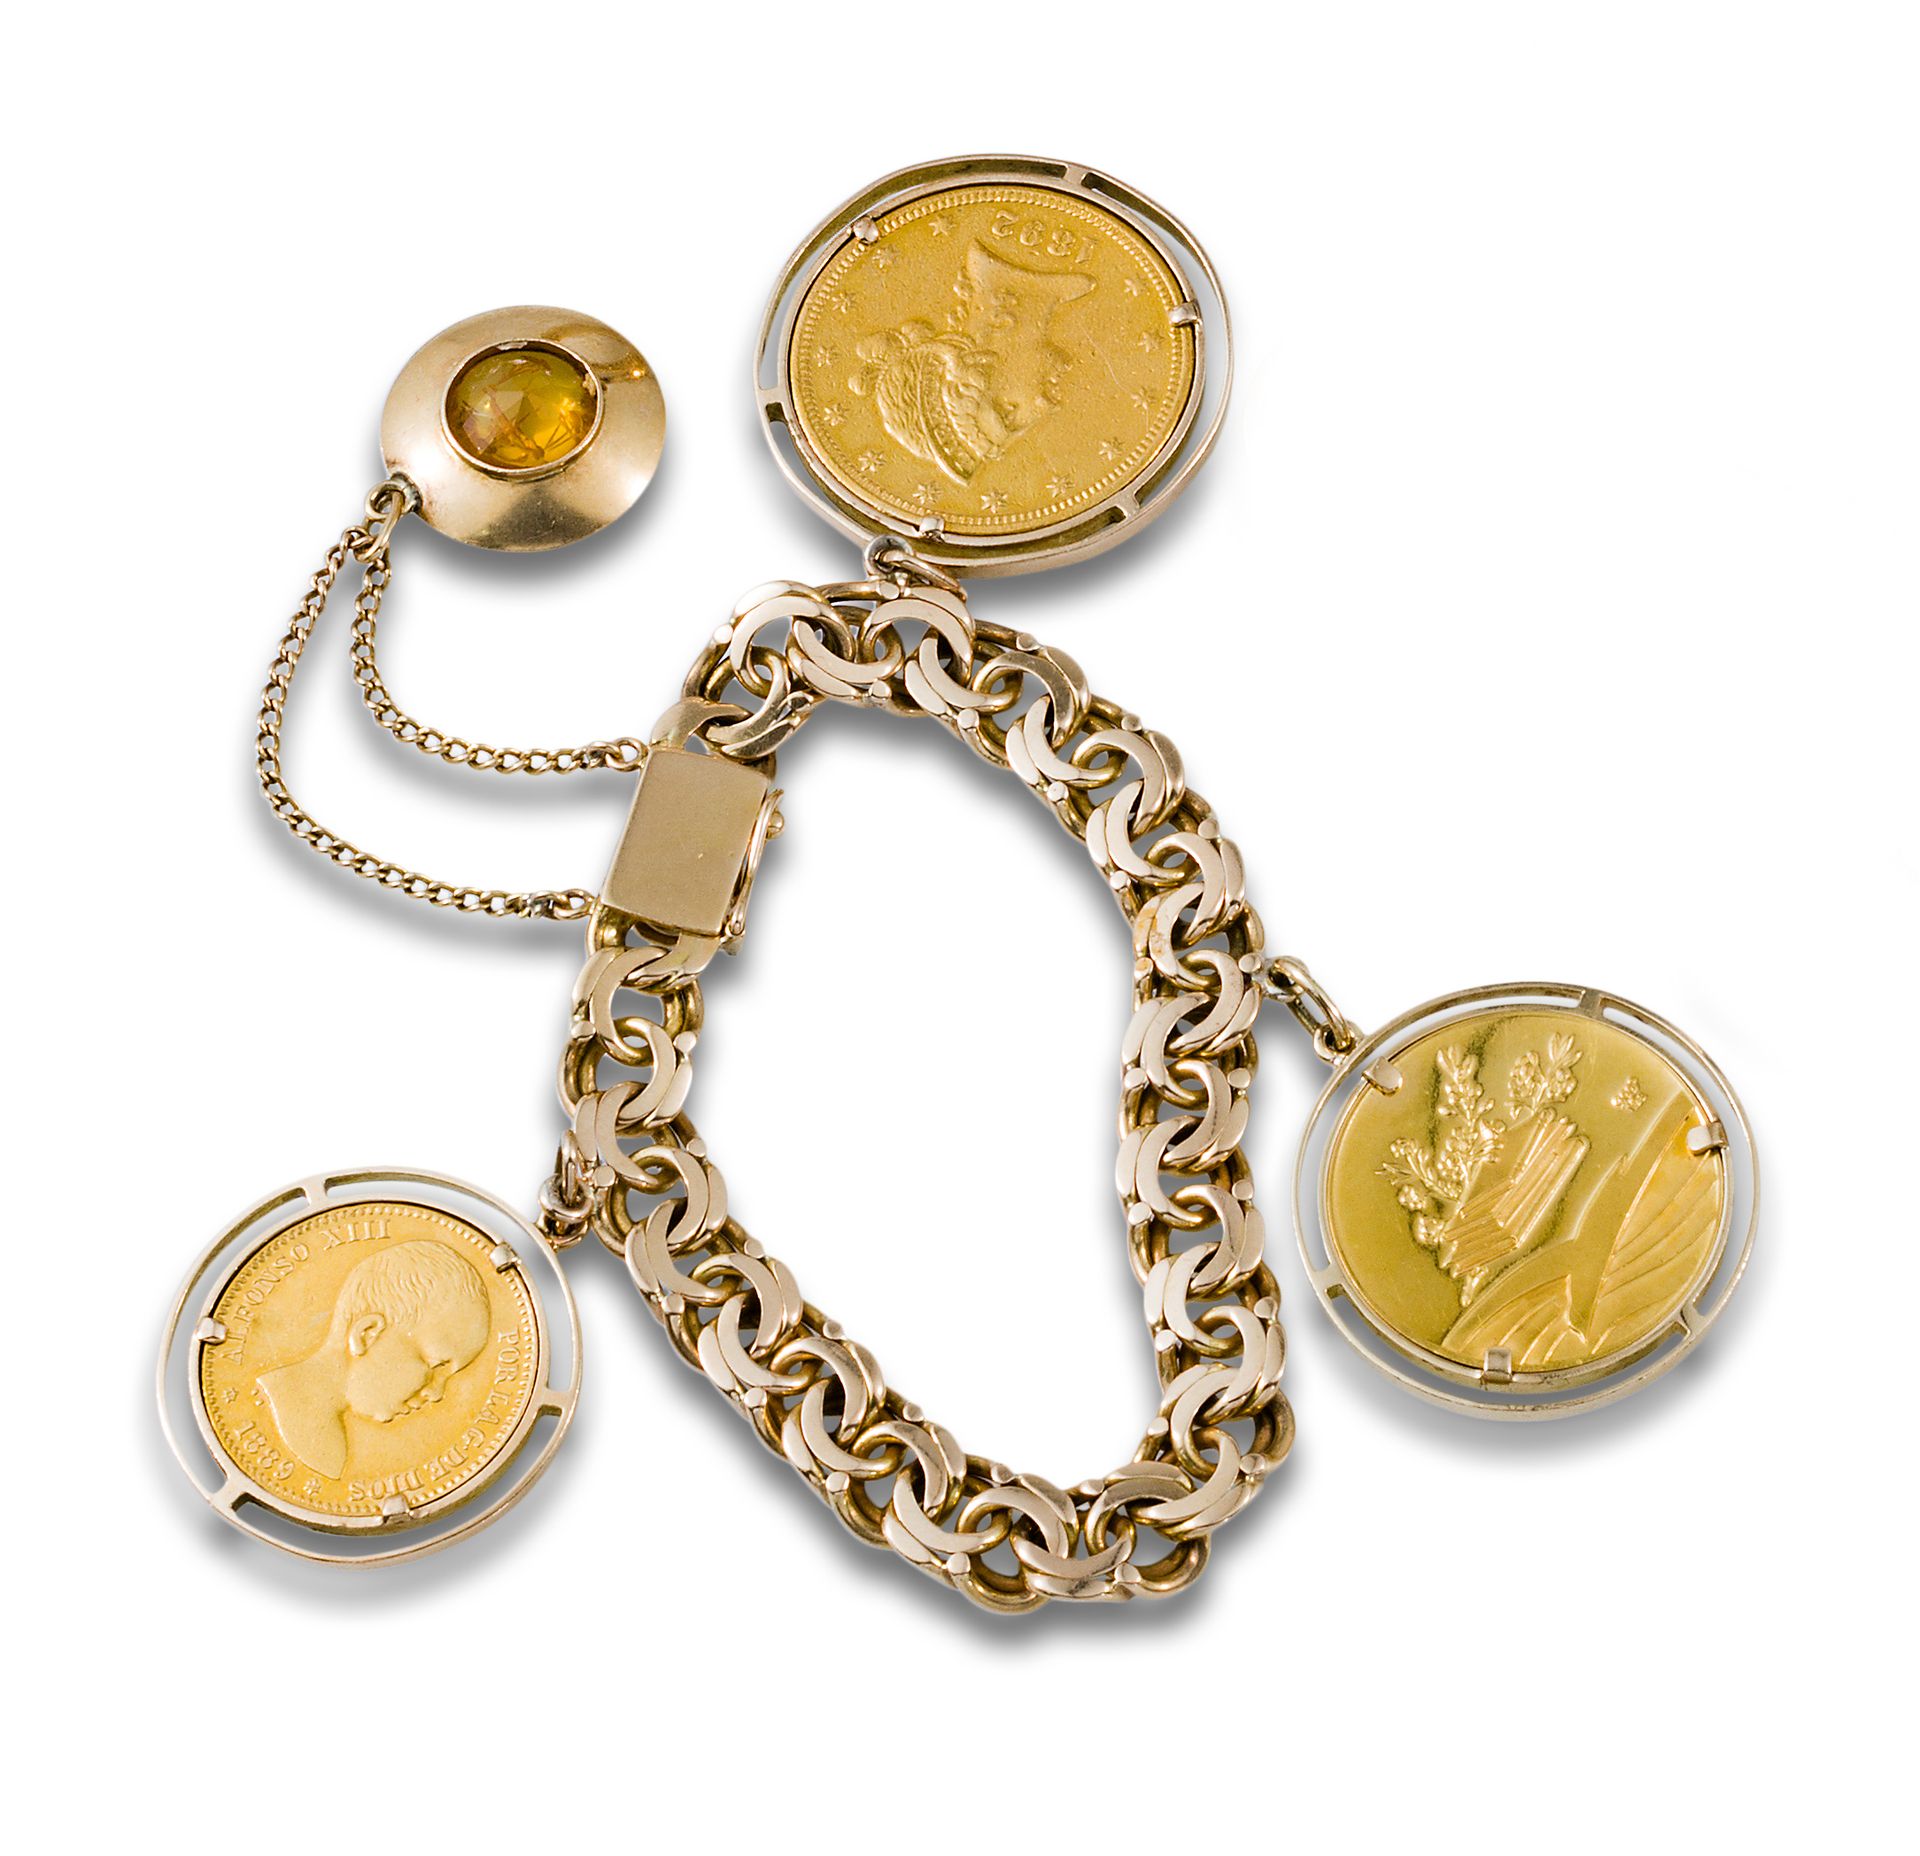 18kt yellow gold braided bracelet with coins and pendant charm. Bracciale intrec&hellip;